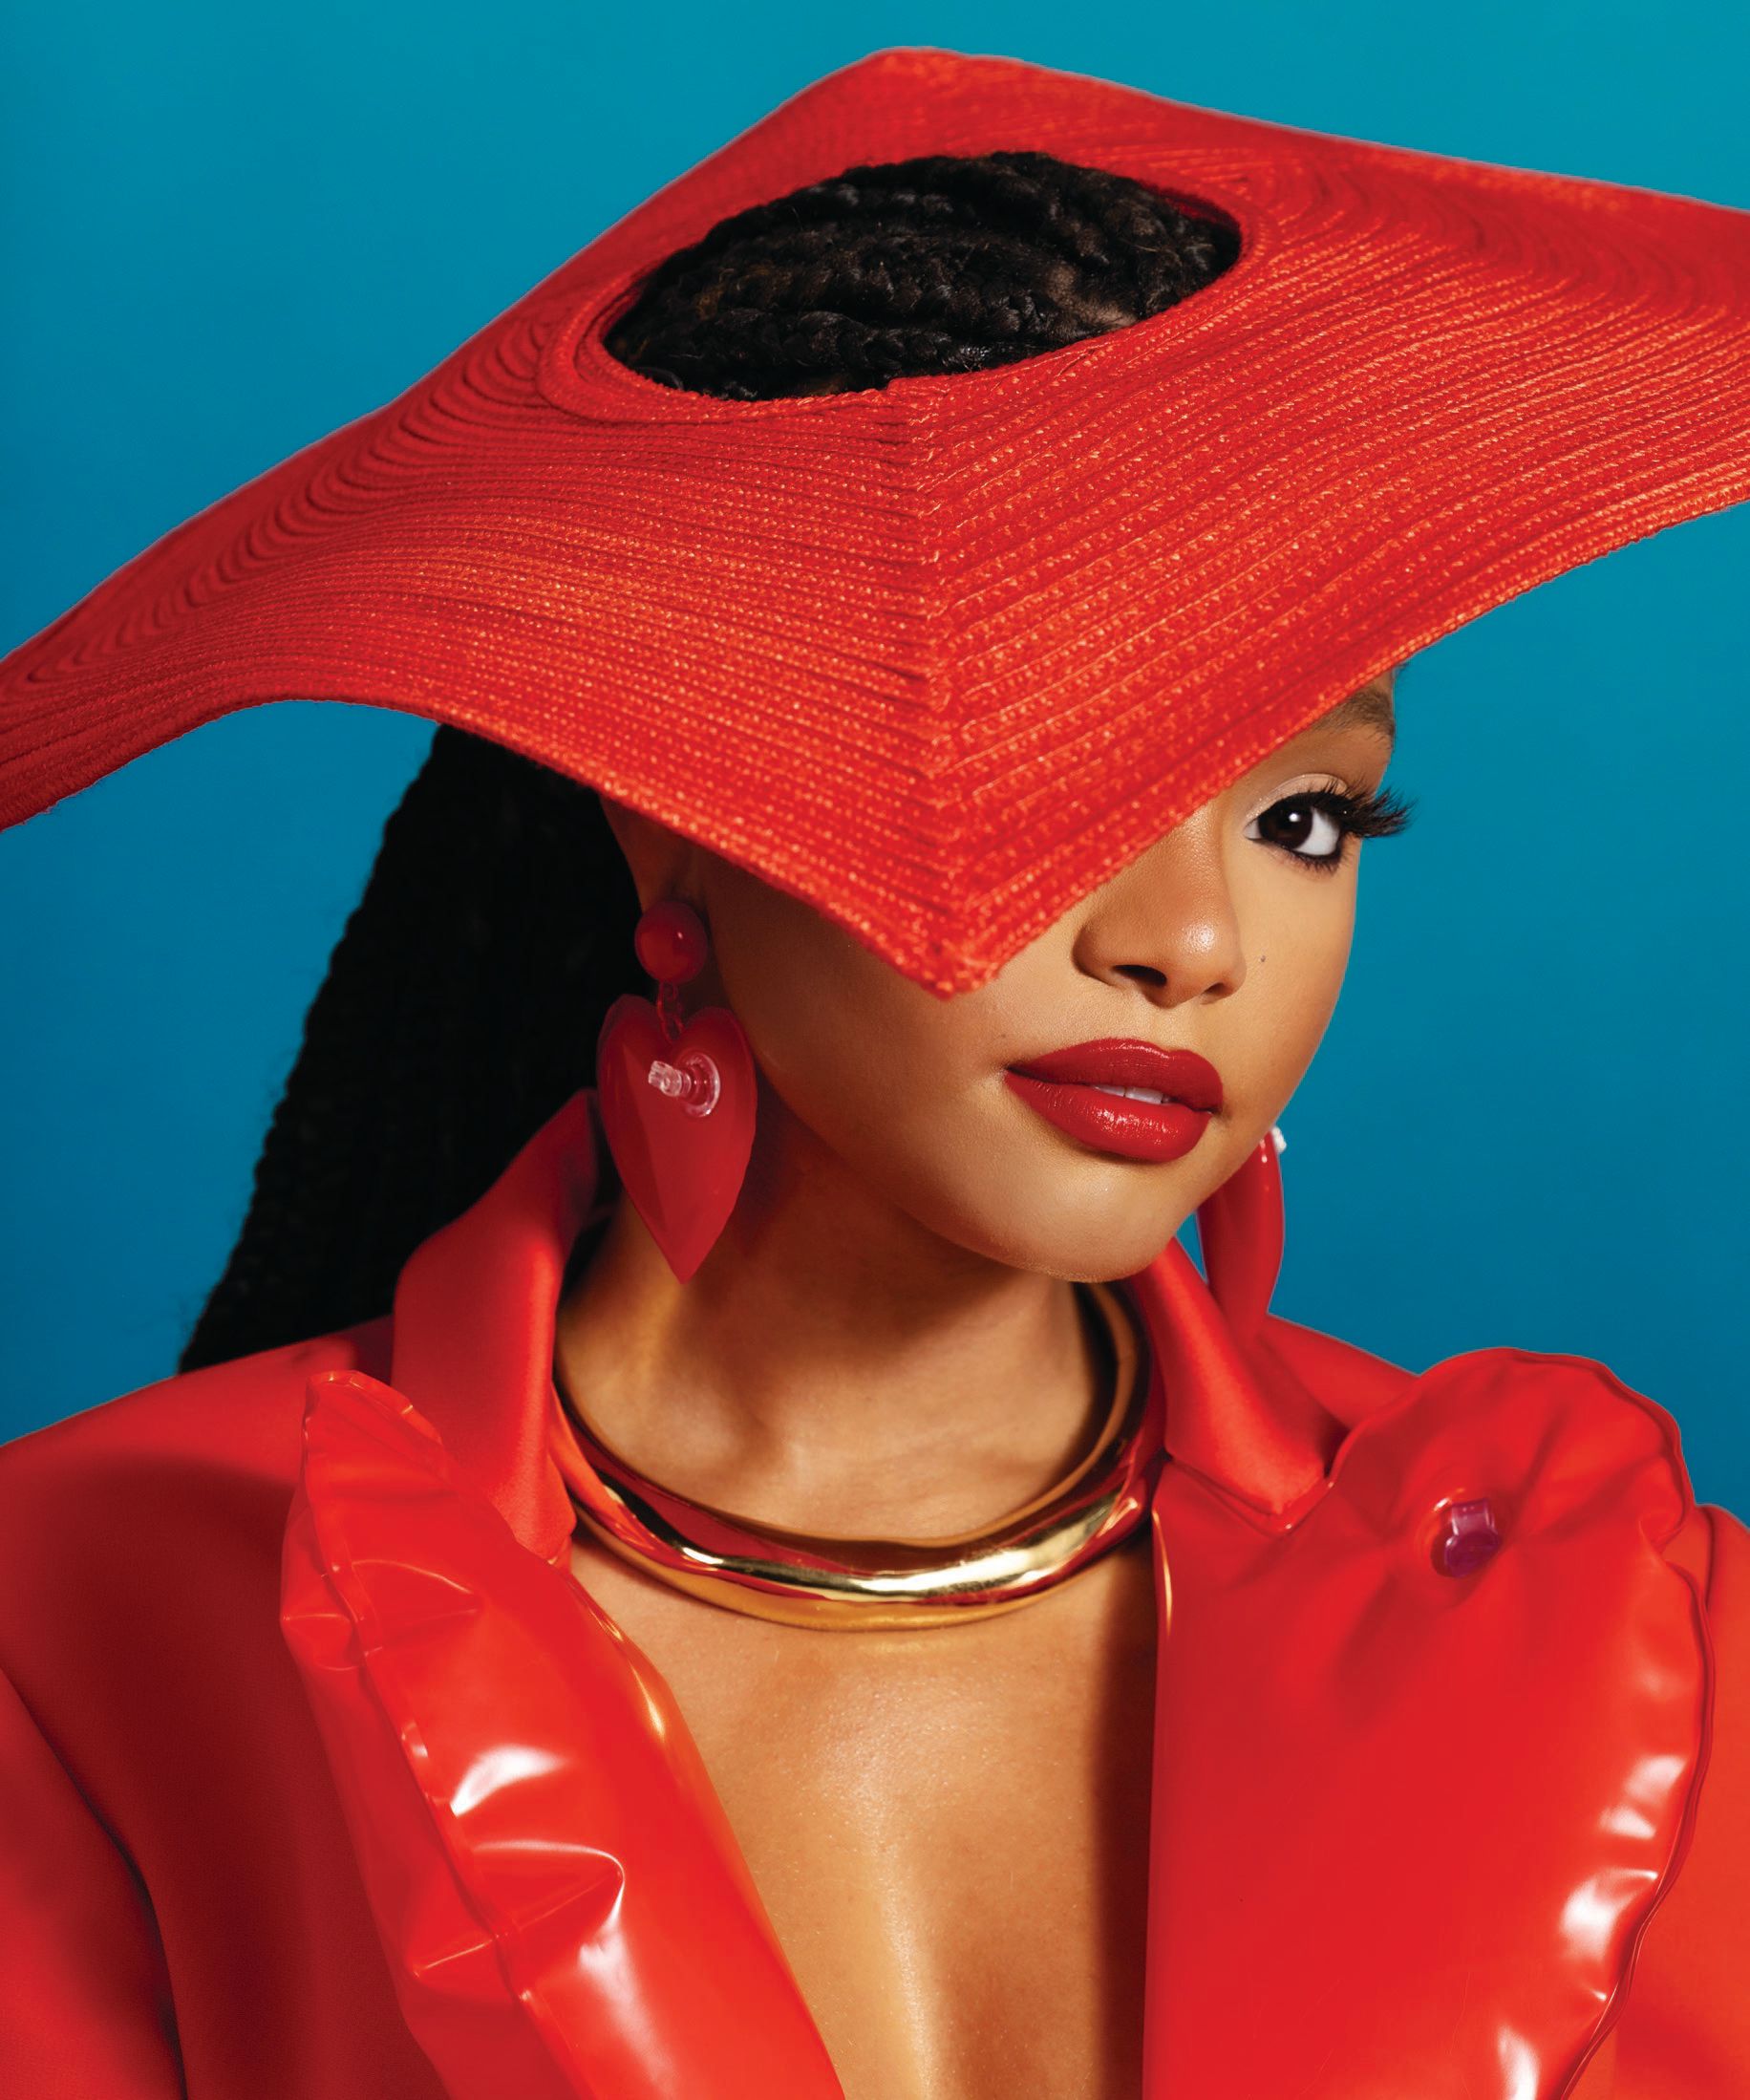 Moschino suit, hat and earrings, moschino.com; Alexis Bittar necklace, alexisbittar.com. Photo Assistant: Will Azcona Hair by Fesa Nu Makeup by Christiana Cassell PHOTOGRAPHED BY RAVEN B. VARONA STYLED BY NICHOLE GOODMAN